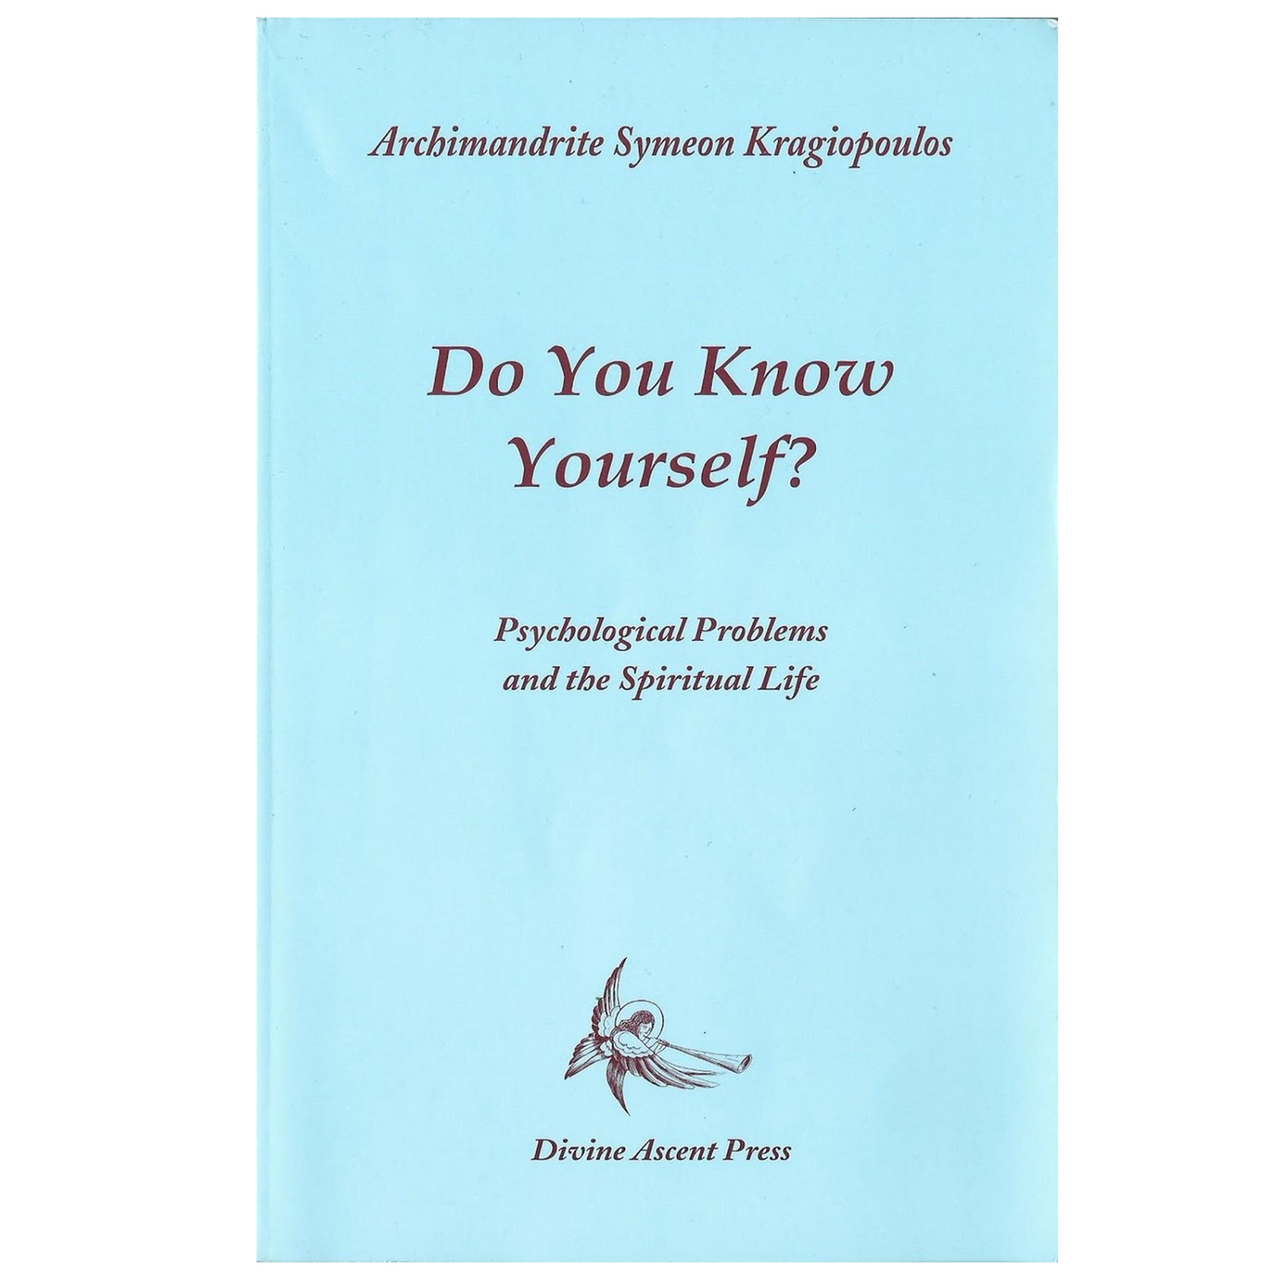 Do You Know Yourself?: Psychological Problems and the Spiritual Life